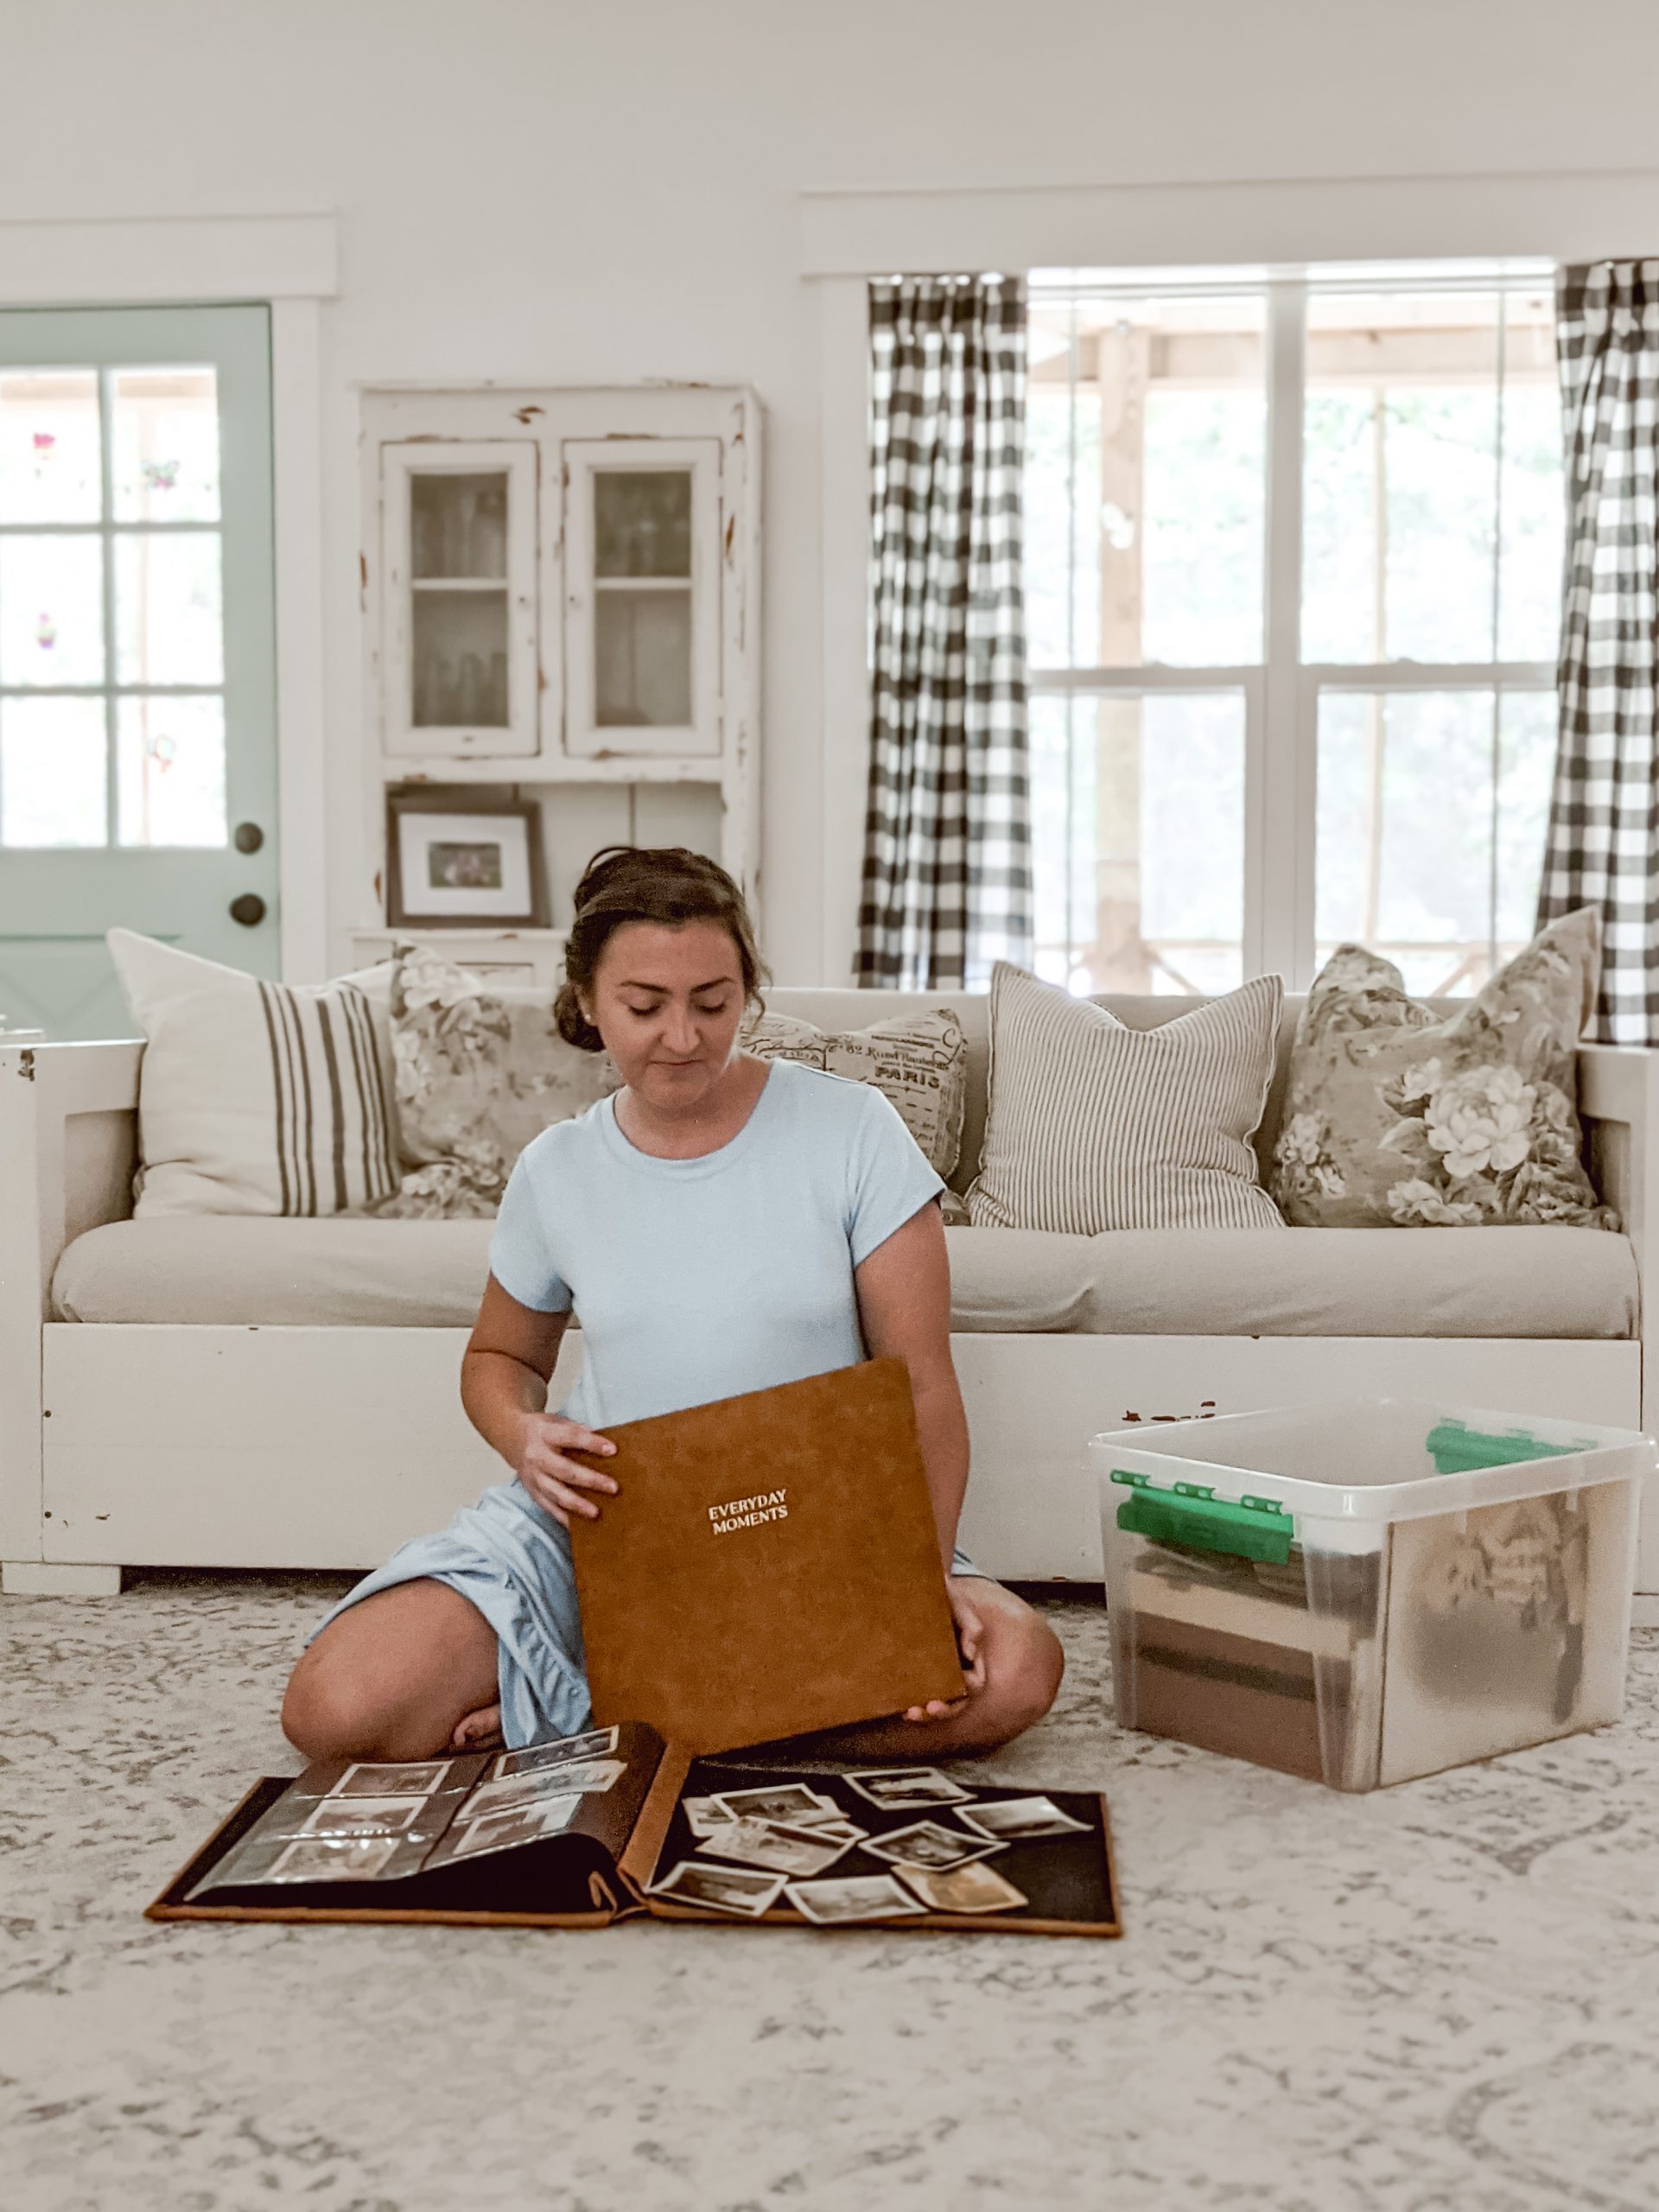 Brittany of White and Woodgrain shows how to store and organize family photos and documents